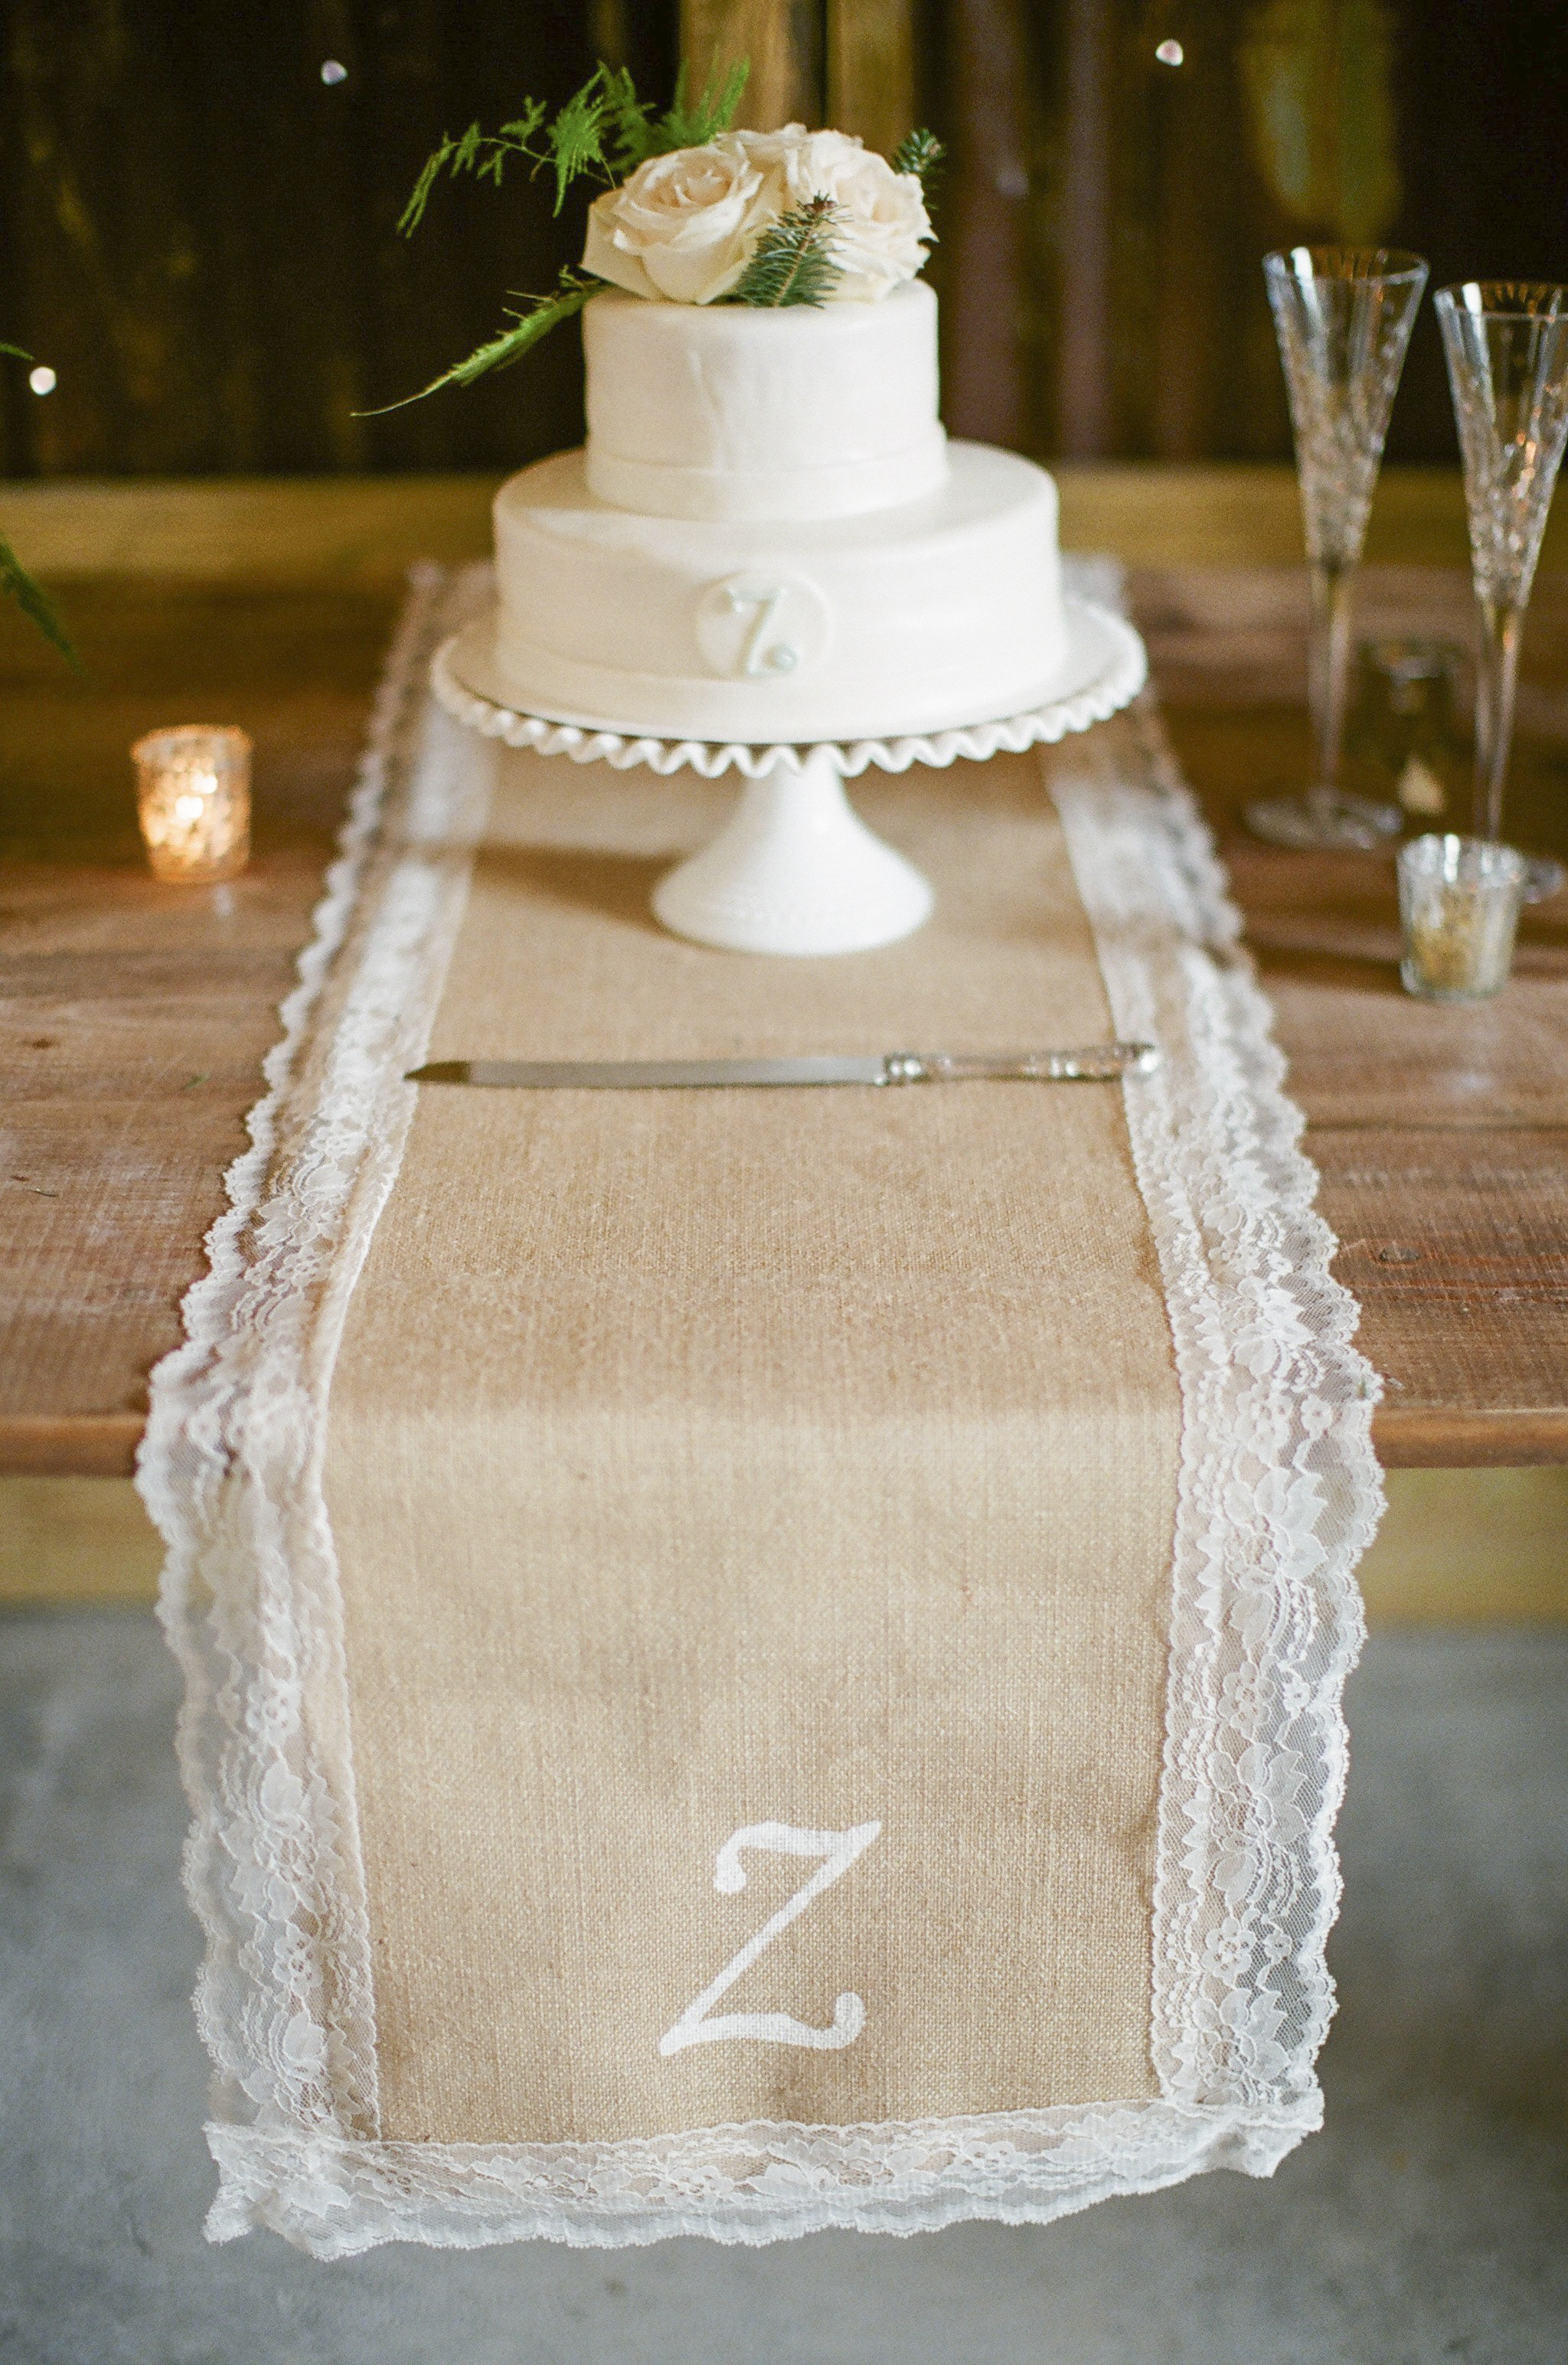 Lace and Burlap Table Runner